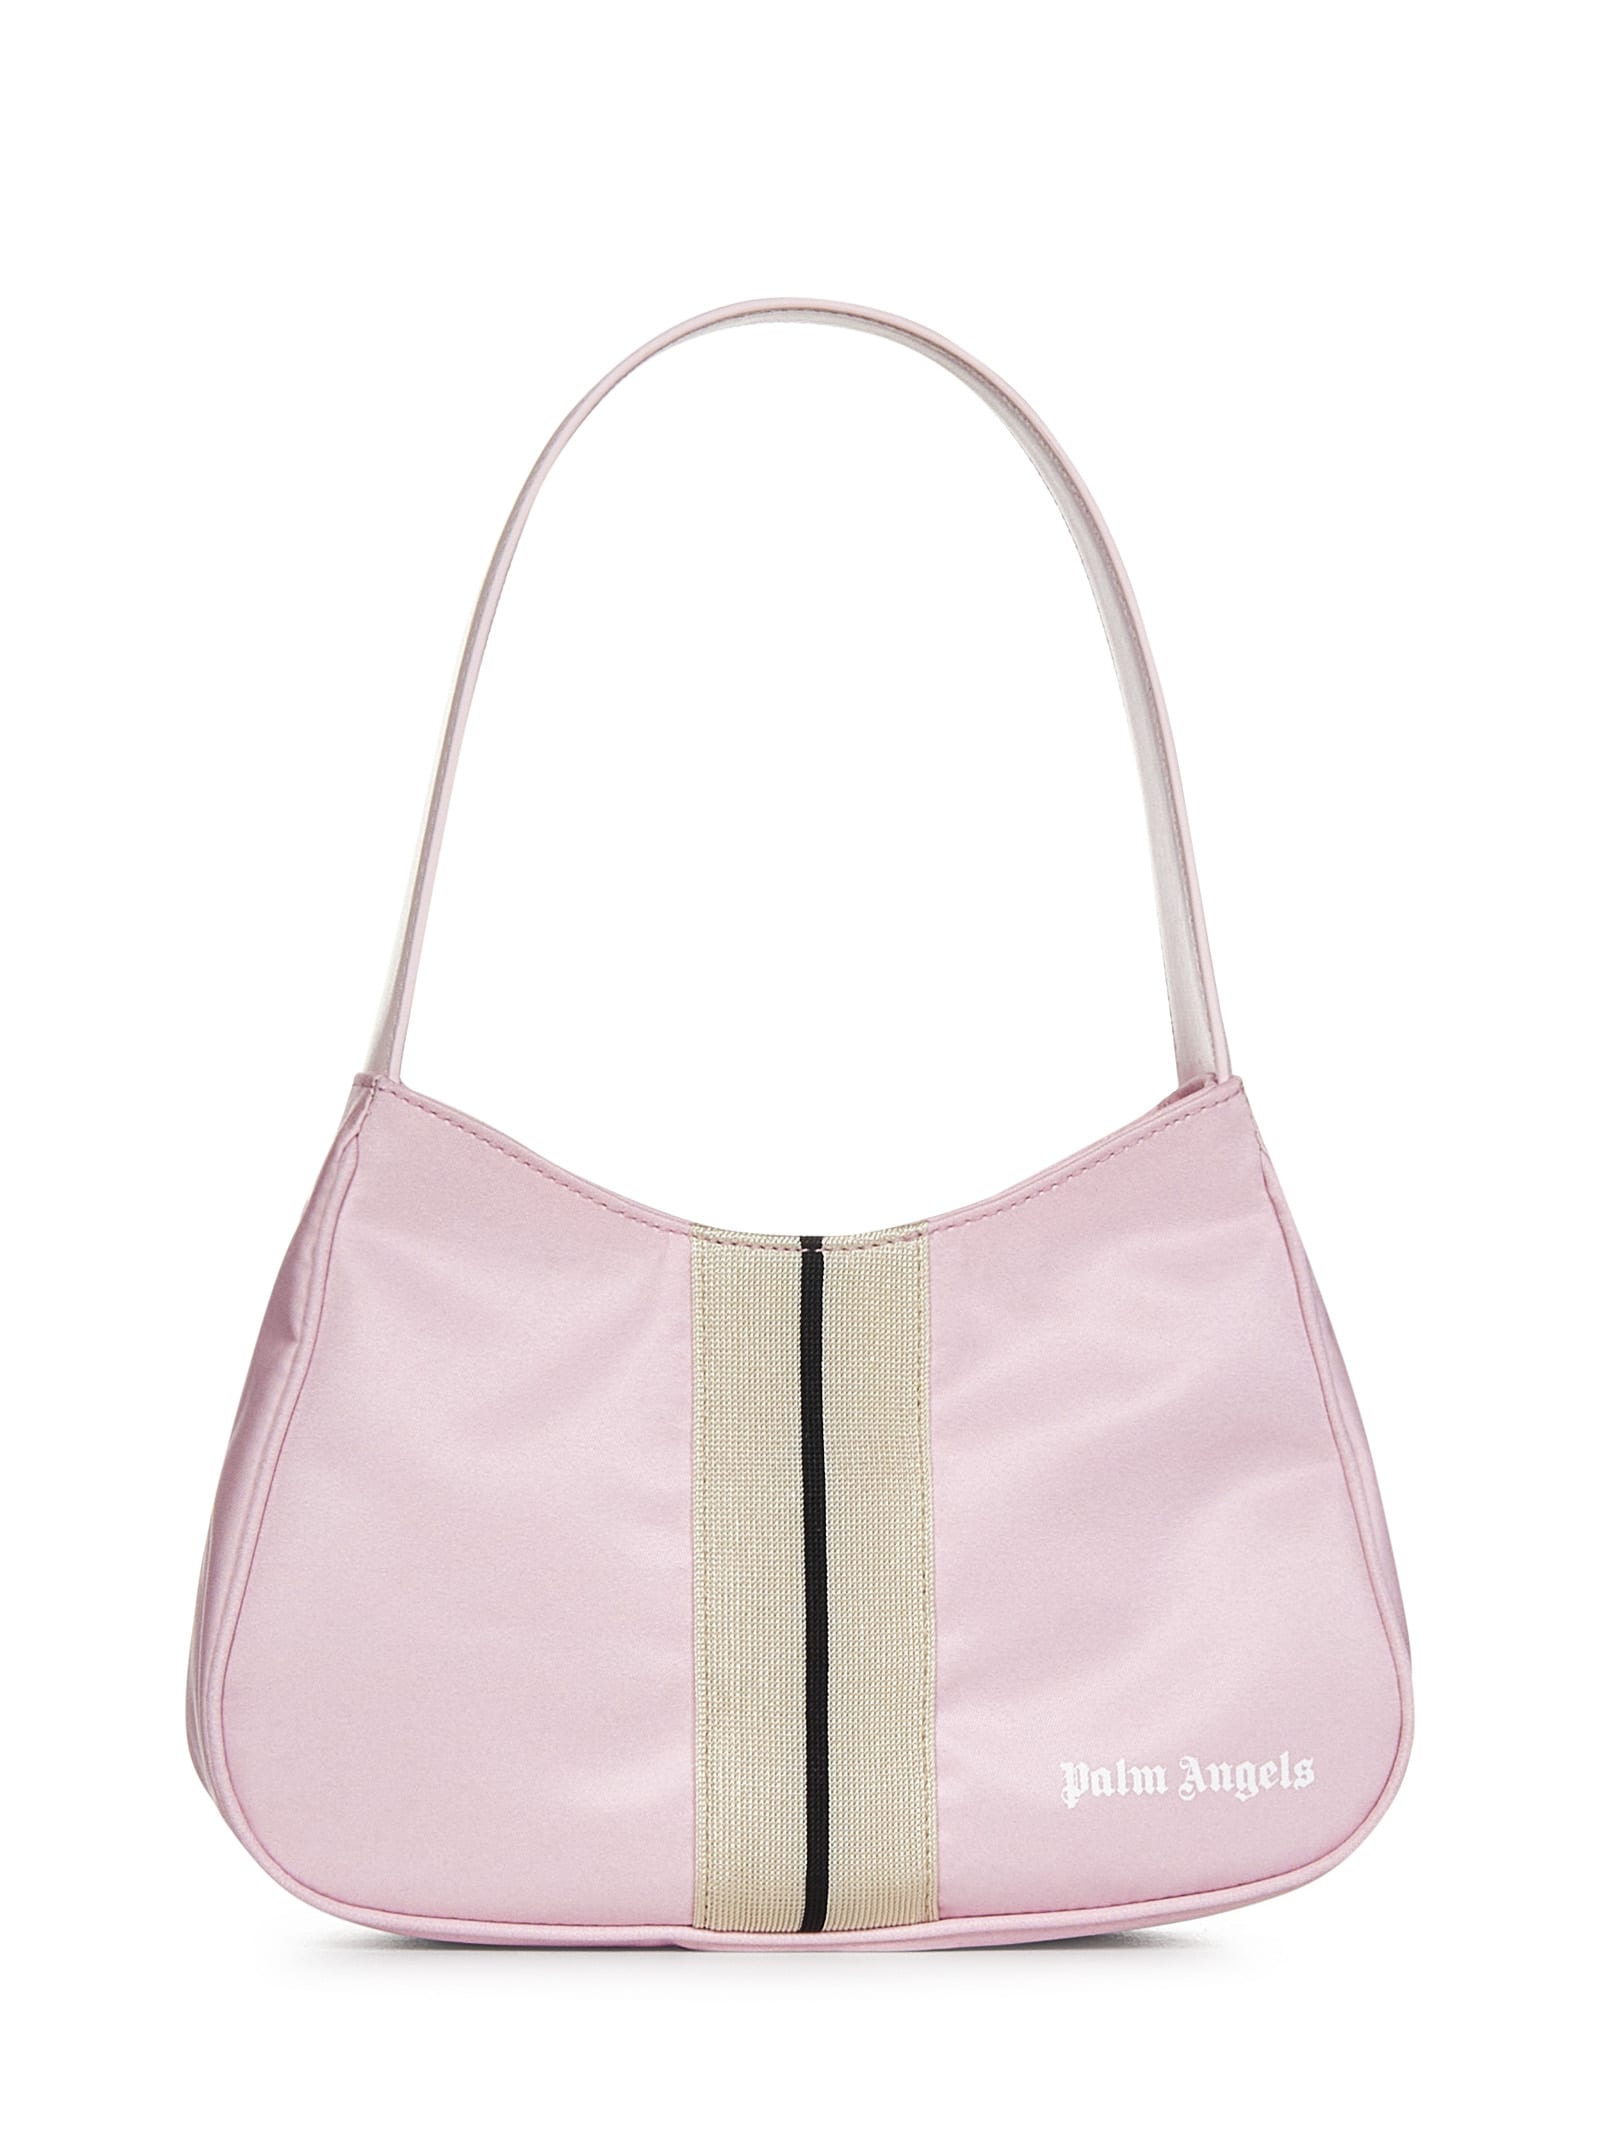 Palm Angels Venice Track Nylon Hobo Bag In Baby Pink,off White